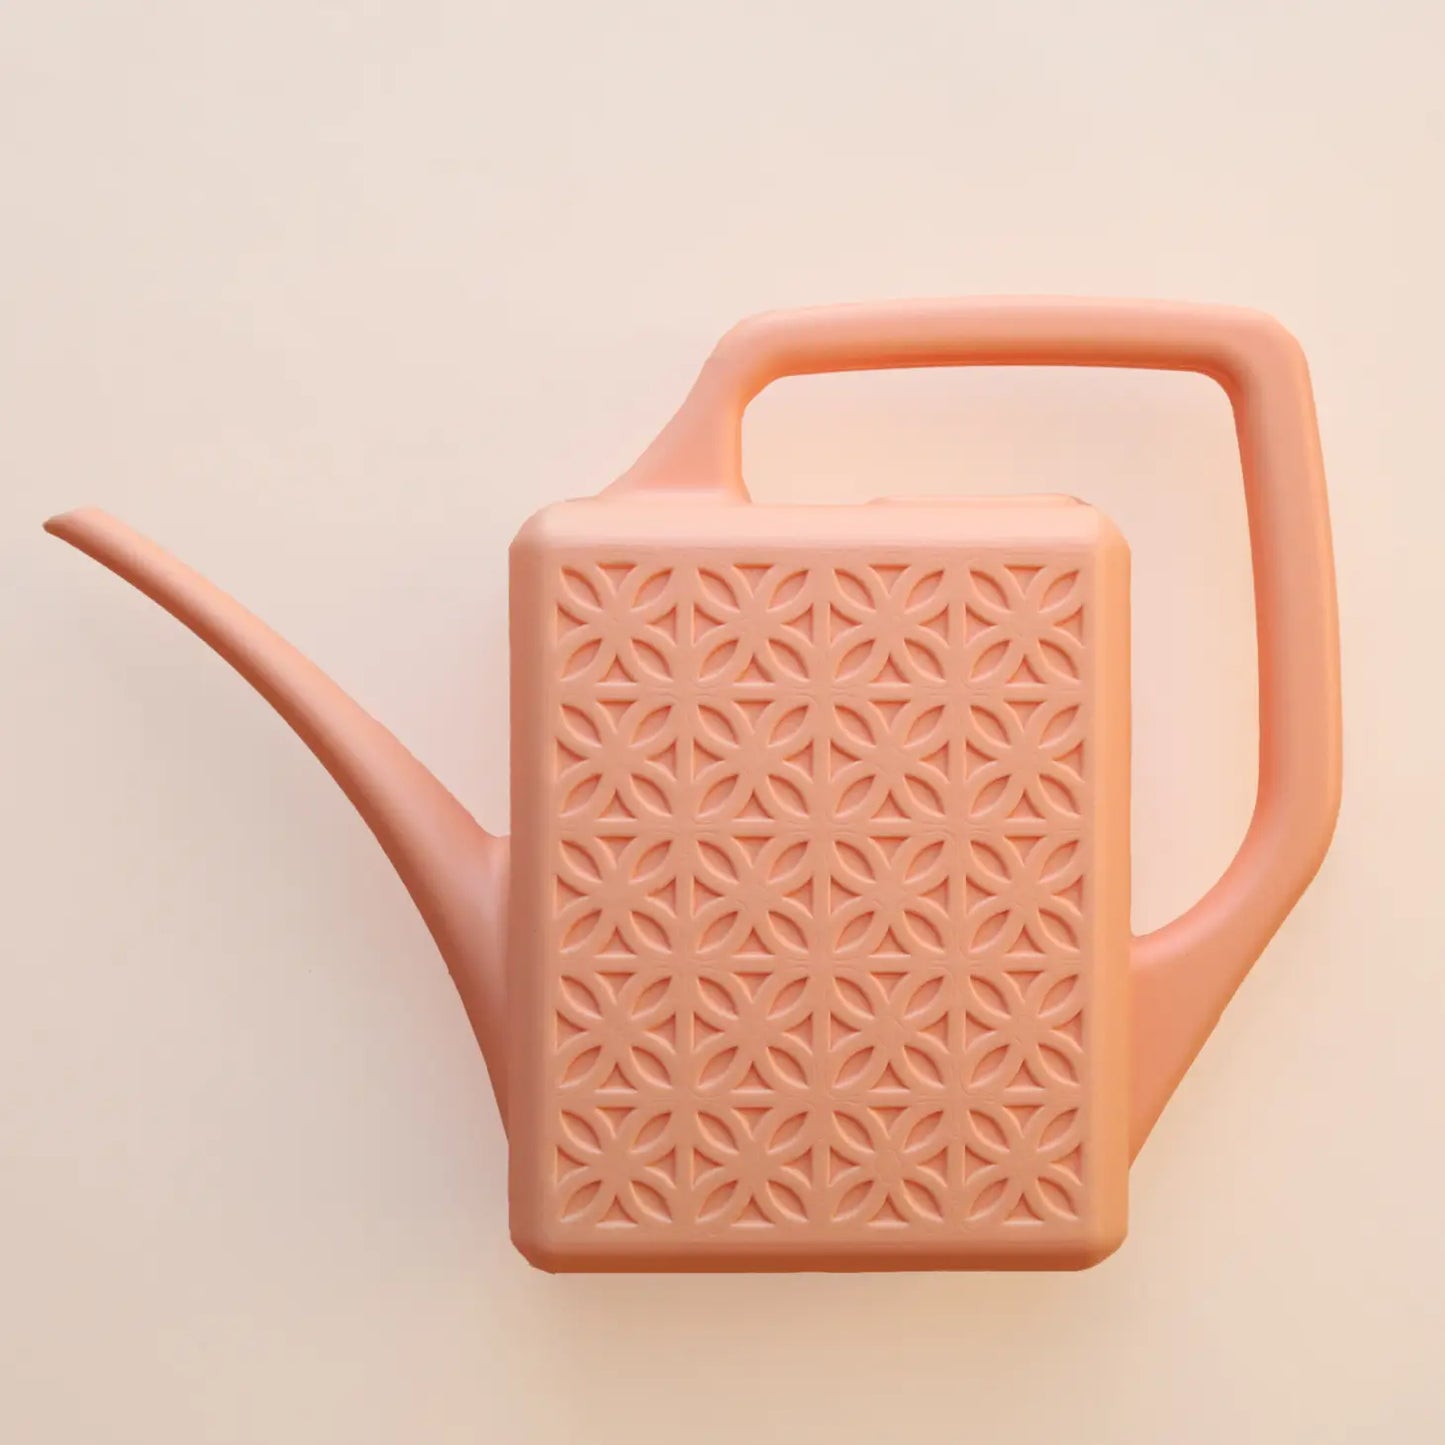 On a peachy background is  a light pink plastic watering can with a breeze block design on both sides along with a long spout and a squared off handle for easy watering.